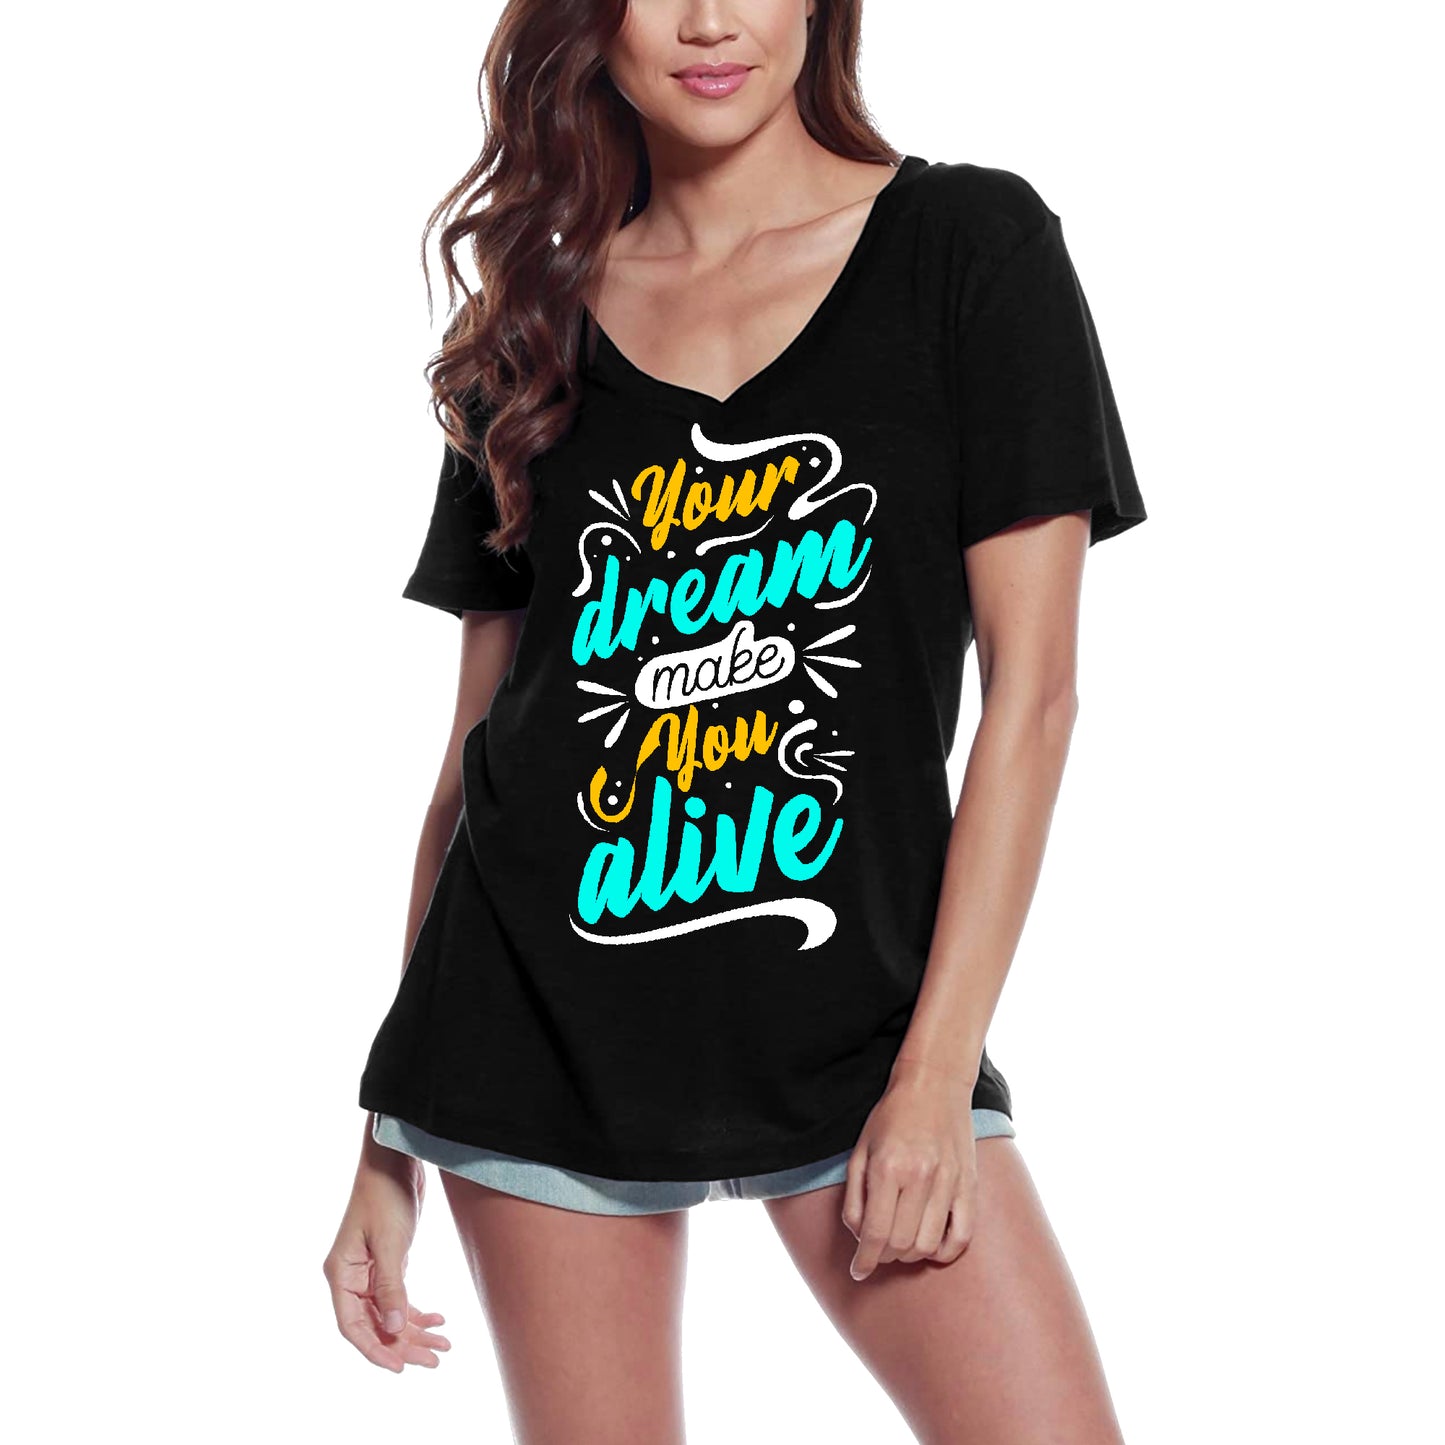 ULTRABASIC Women's T-Shirt Your Dream Make You Alive - Motivational Quote Shirt